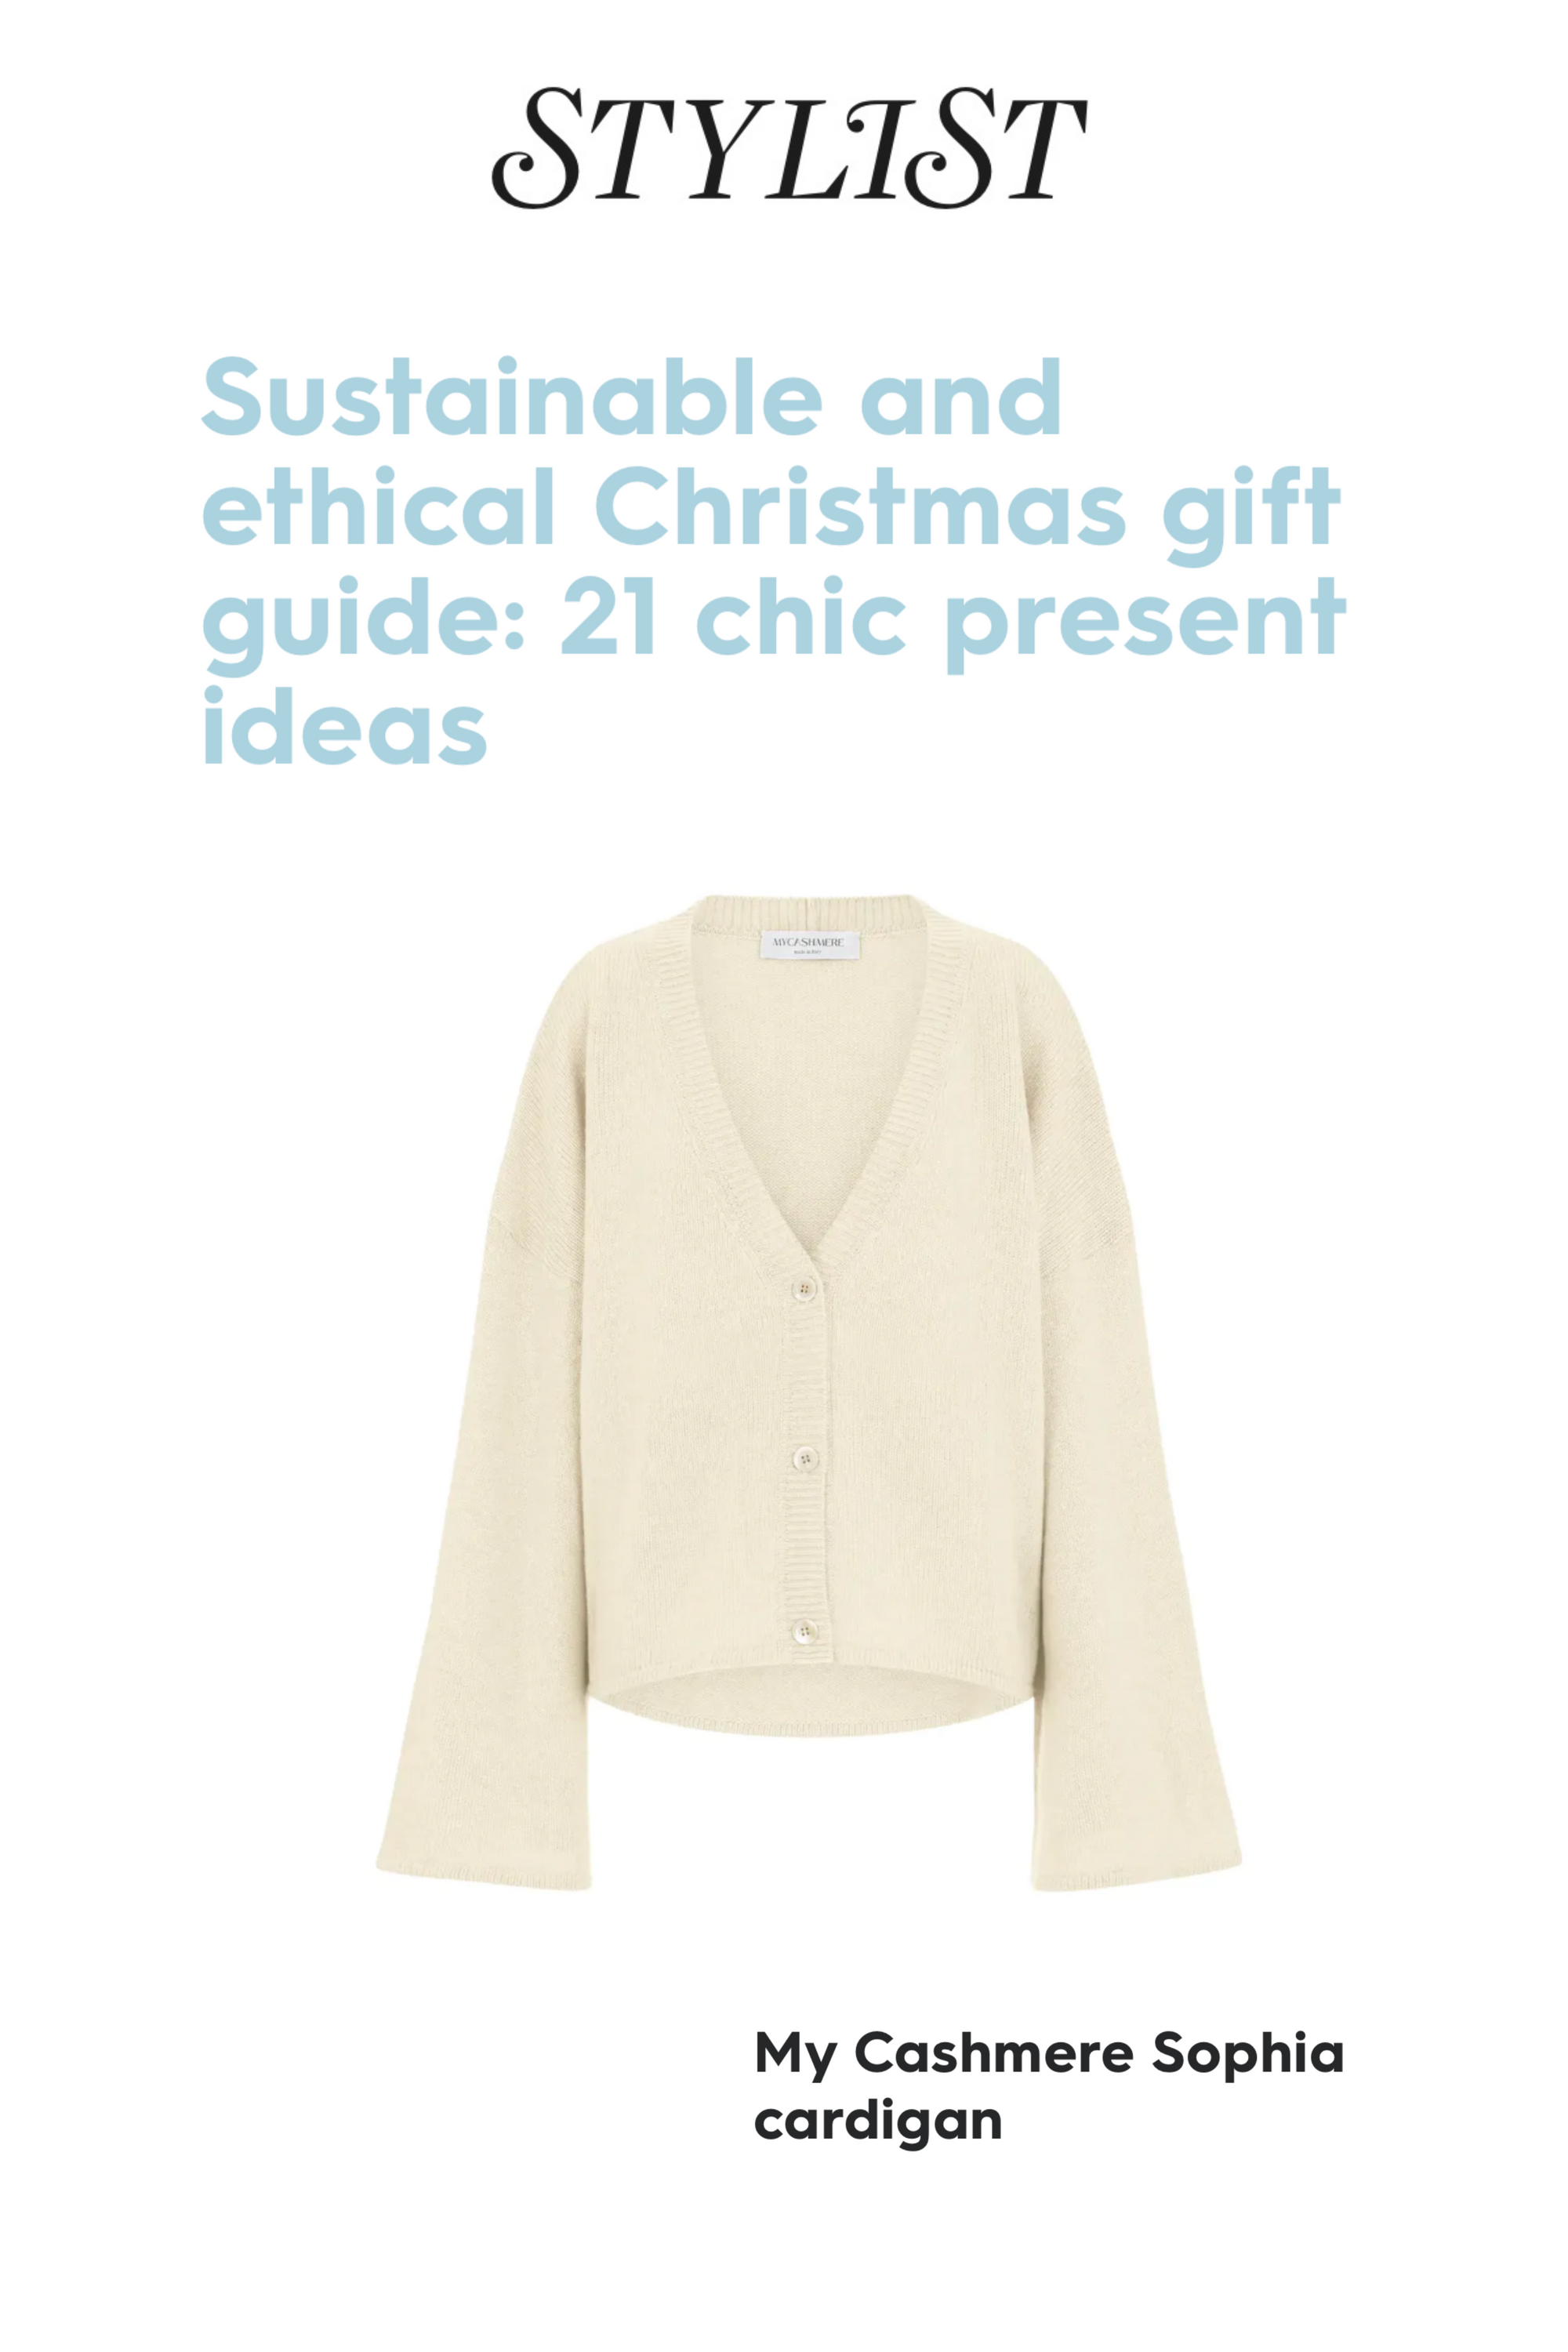 STYLIST | SUSTAINABLE AND ETHICAL CHRISTMAS GIFT GUIDE